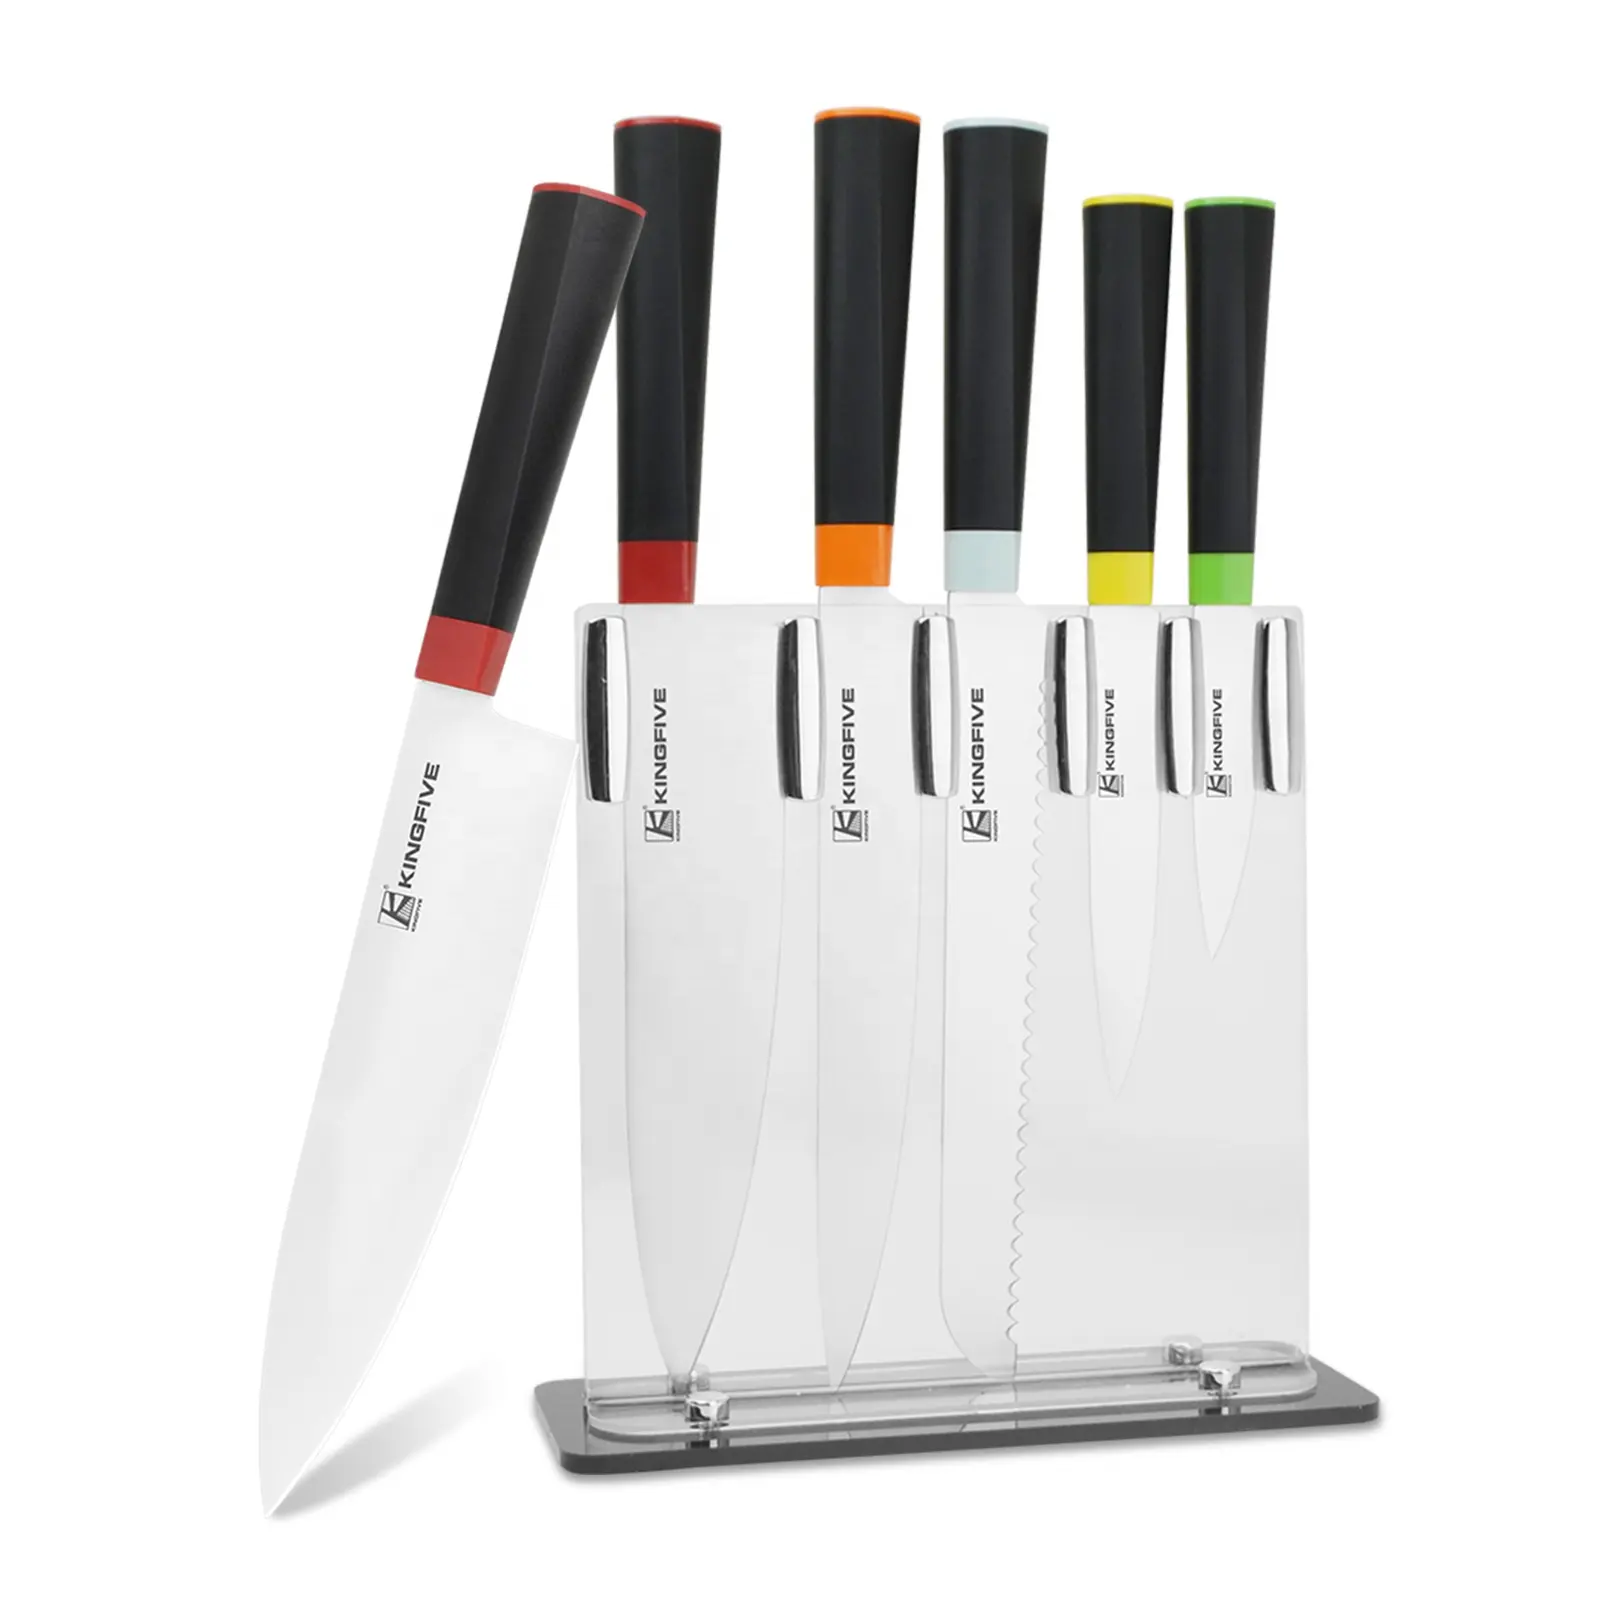 Kingfive Sharp Blade Plastic Kitchen Knife 5 Pcs Stainless Steel Chef Knife Set with Acrylic Stand